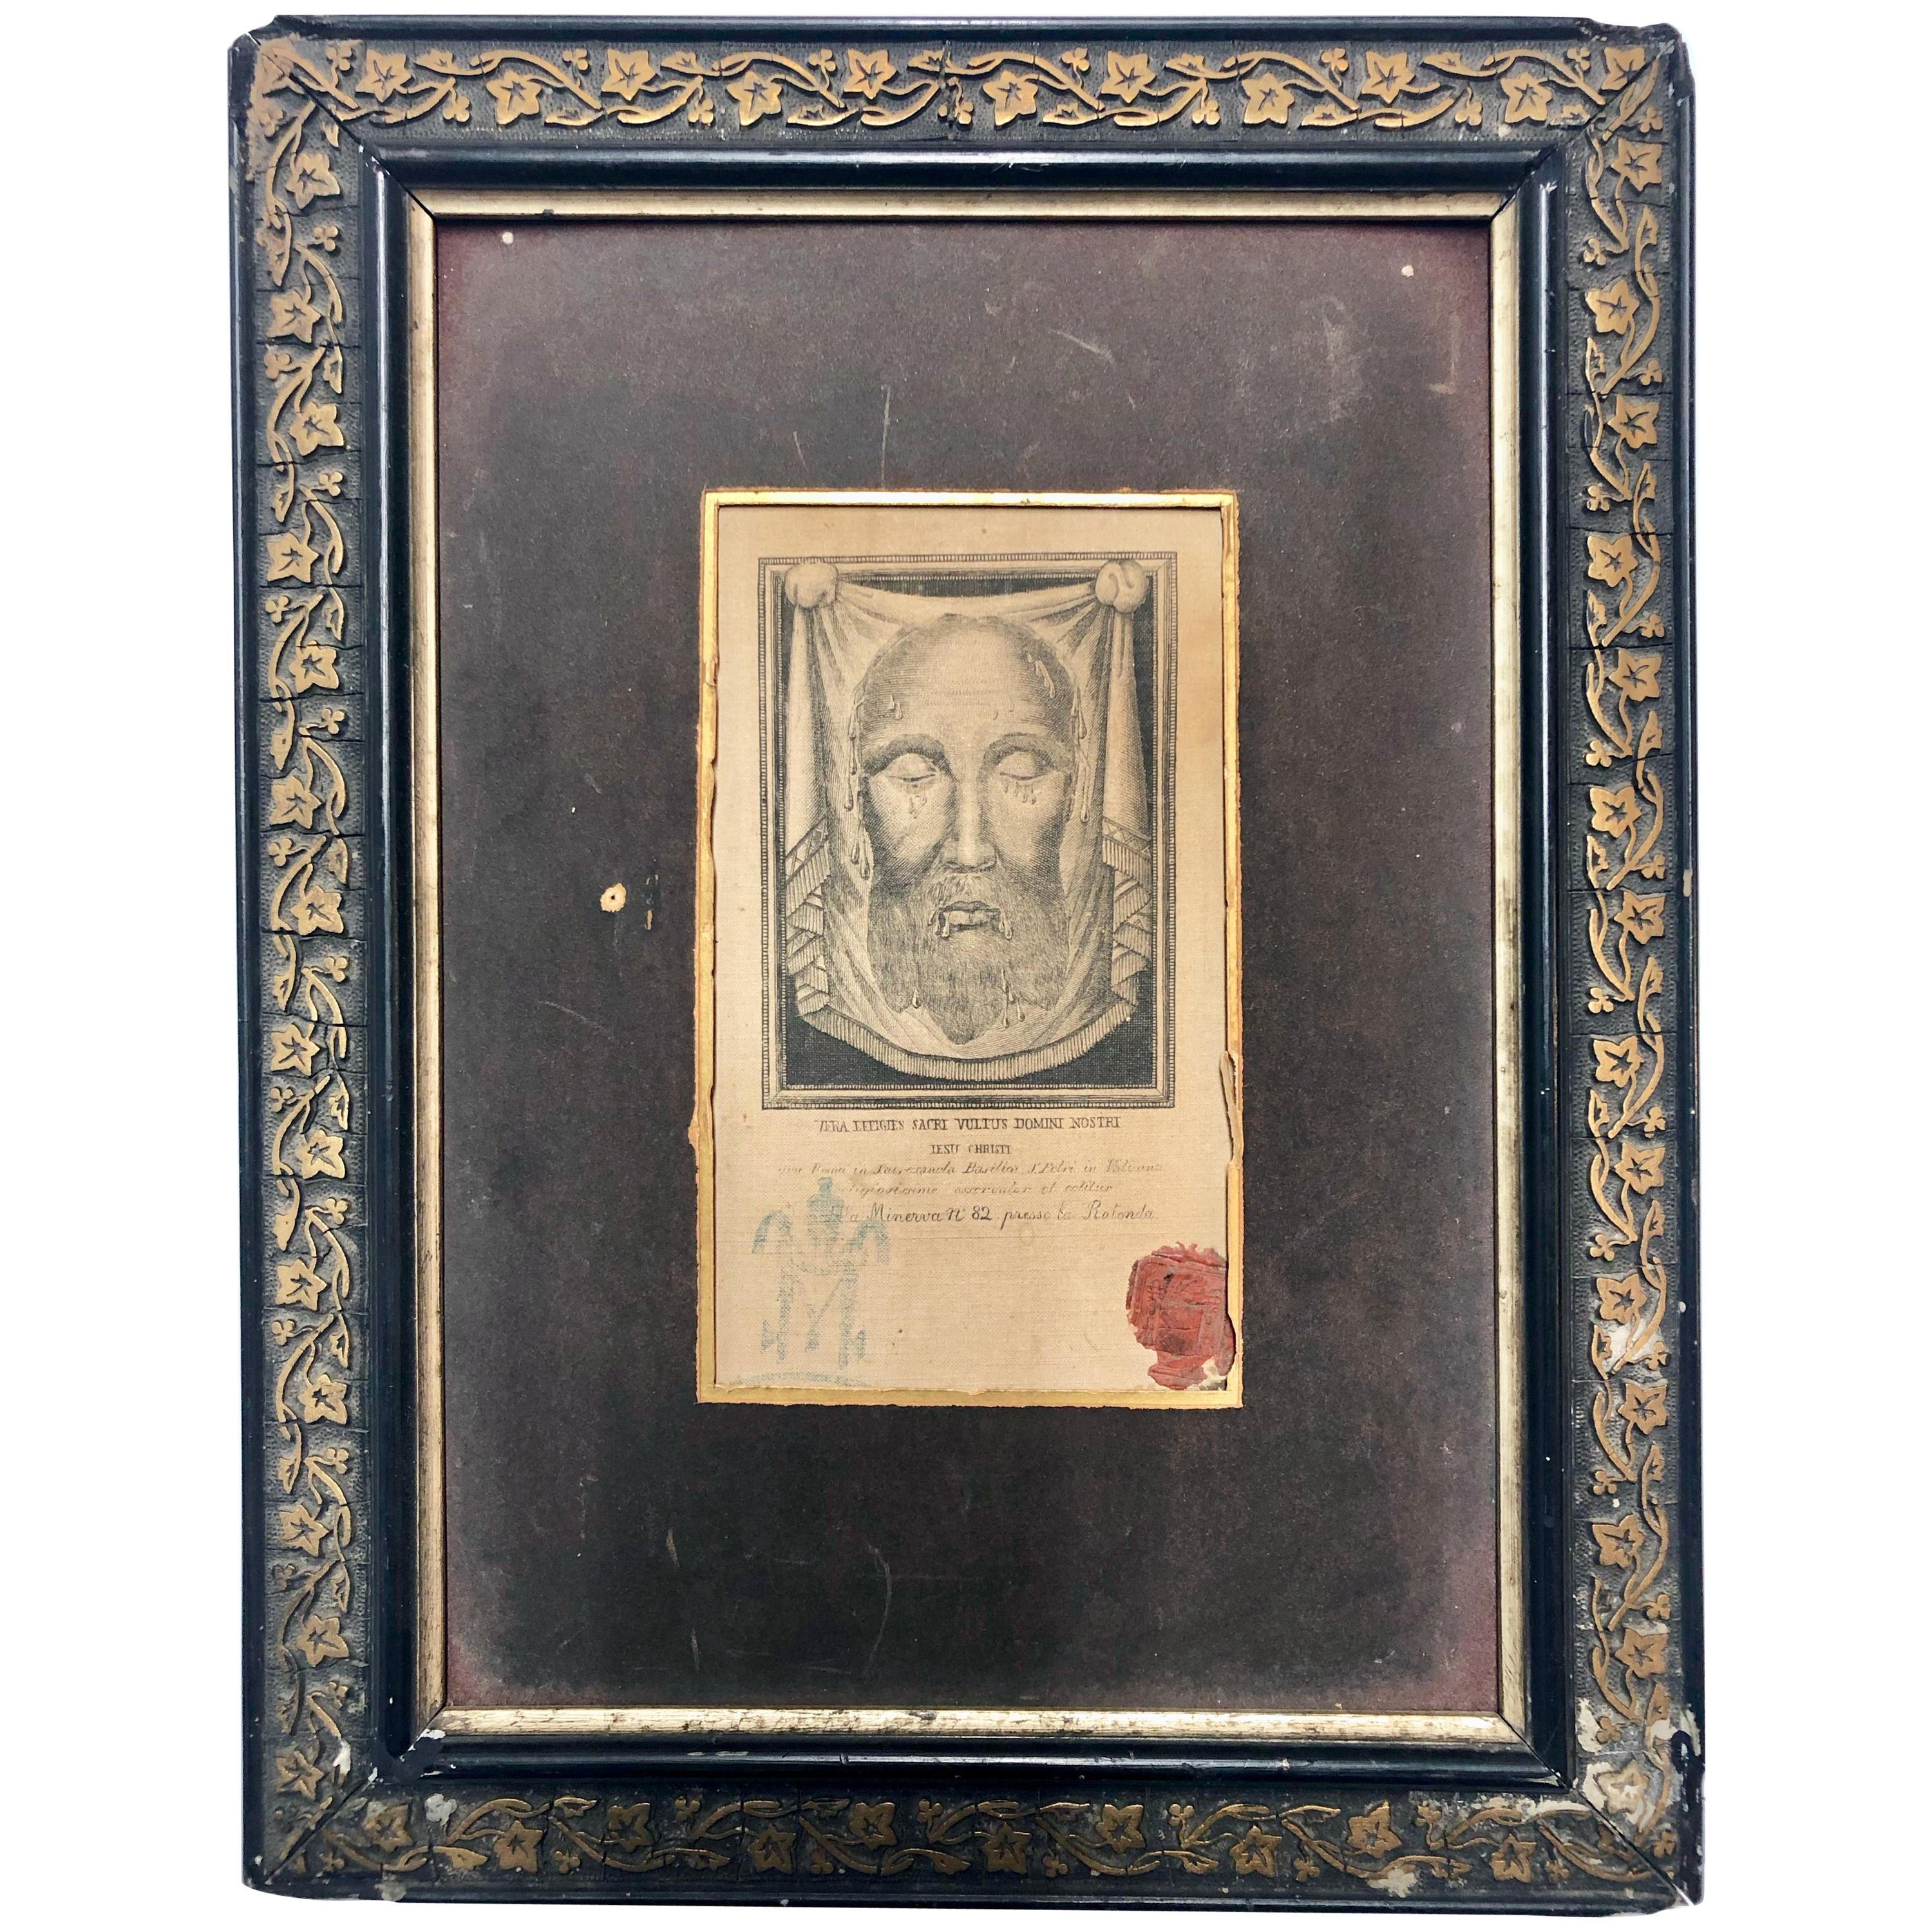 Framed Relic Image of Veronica's Veil, with Vatican Seal and Stamp, Verso